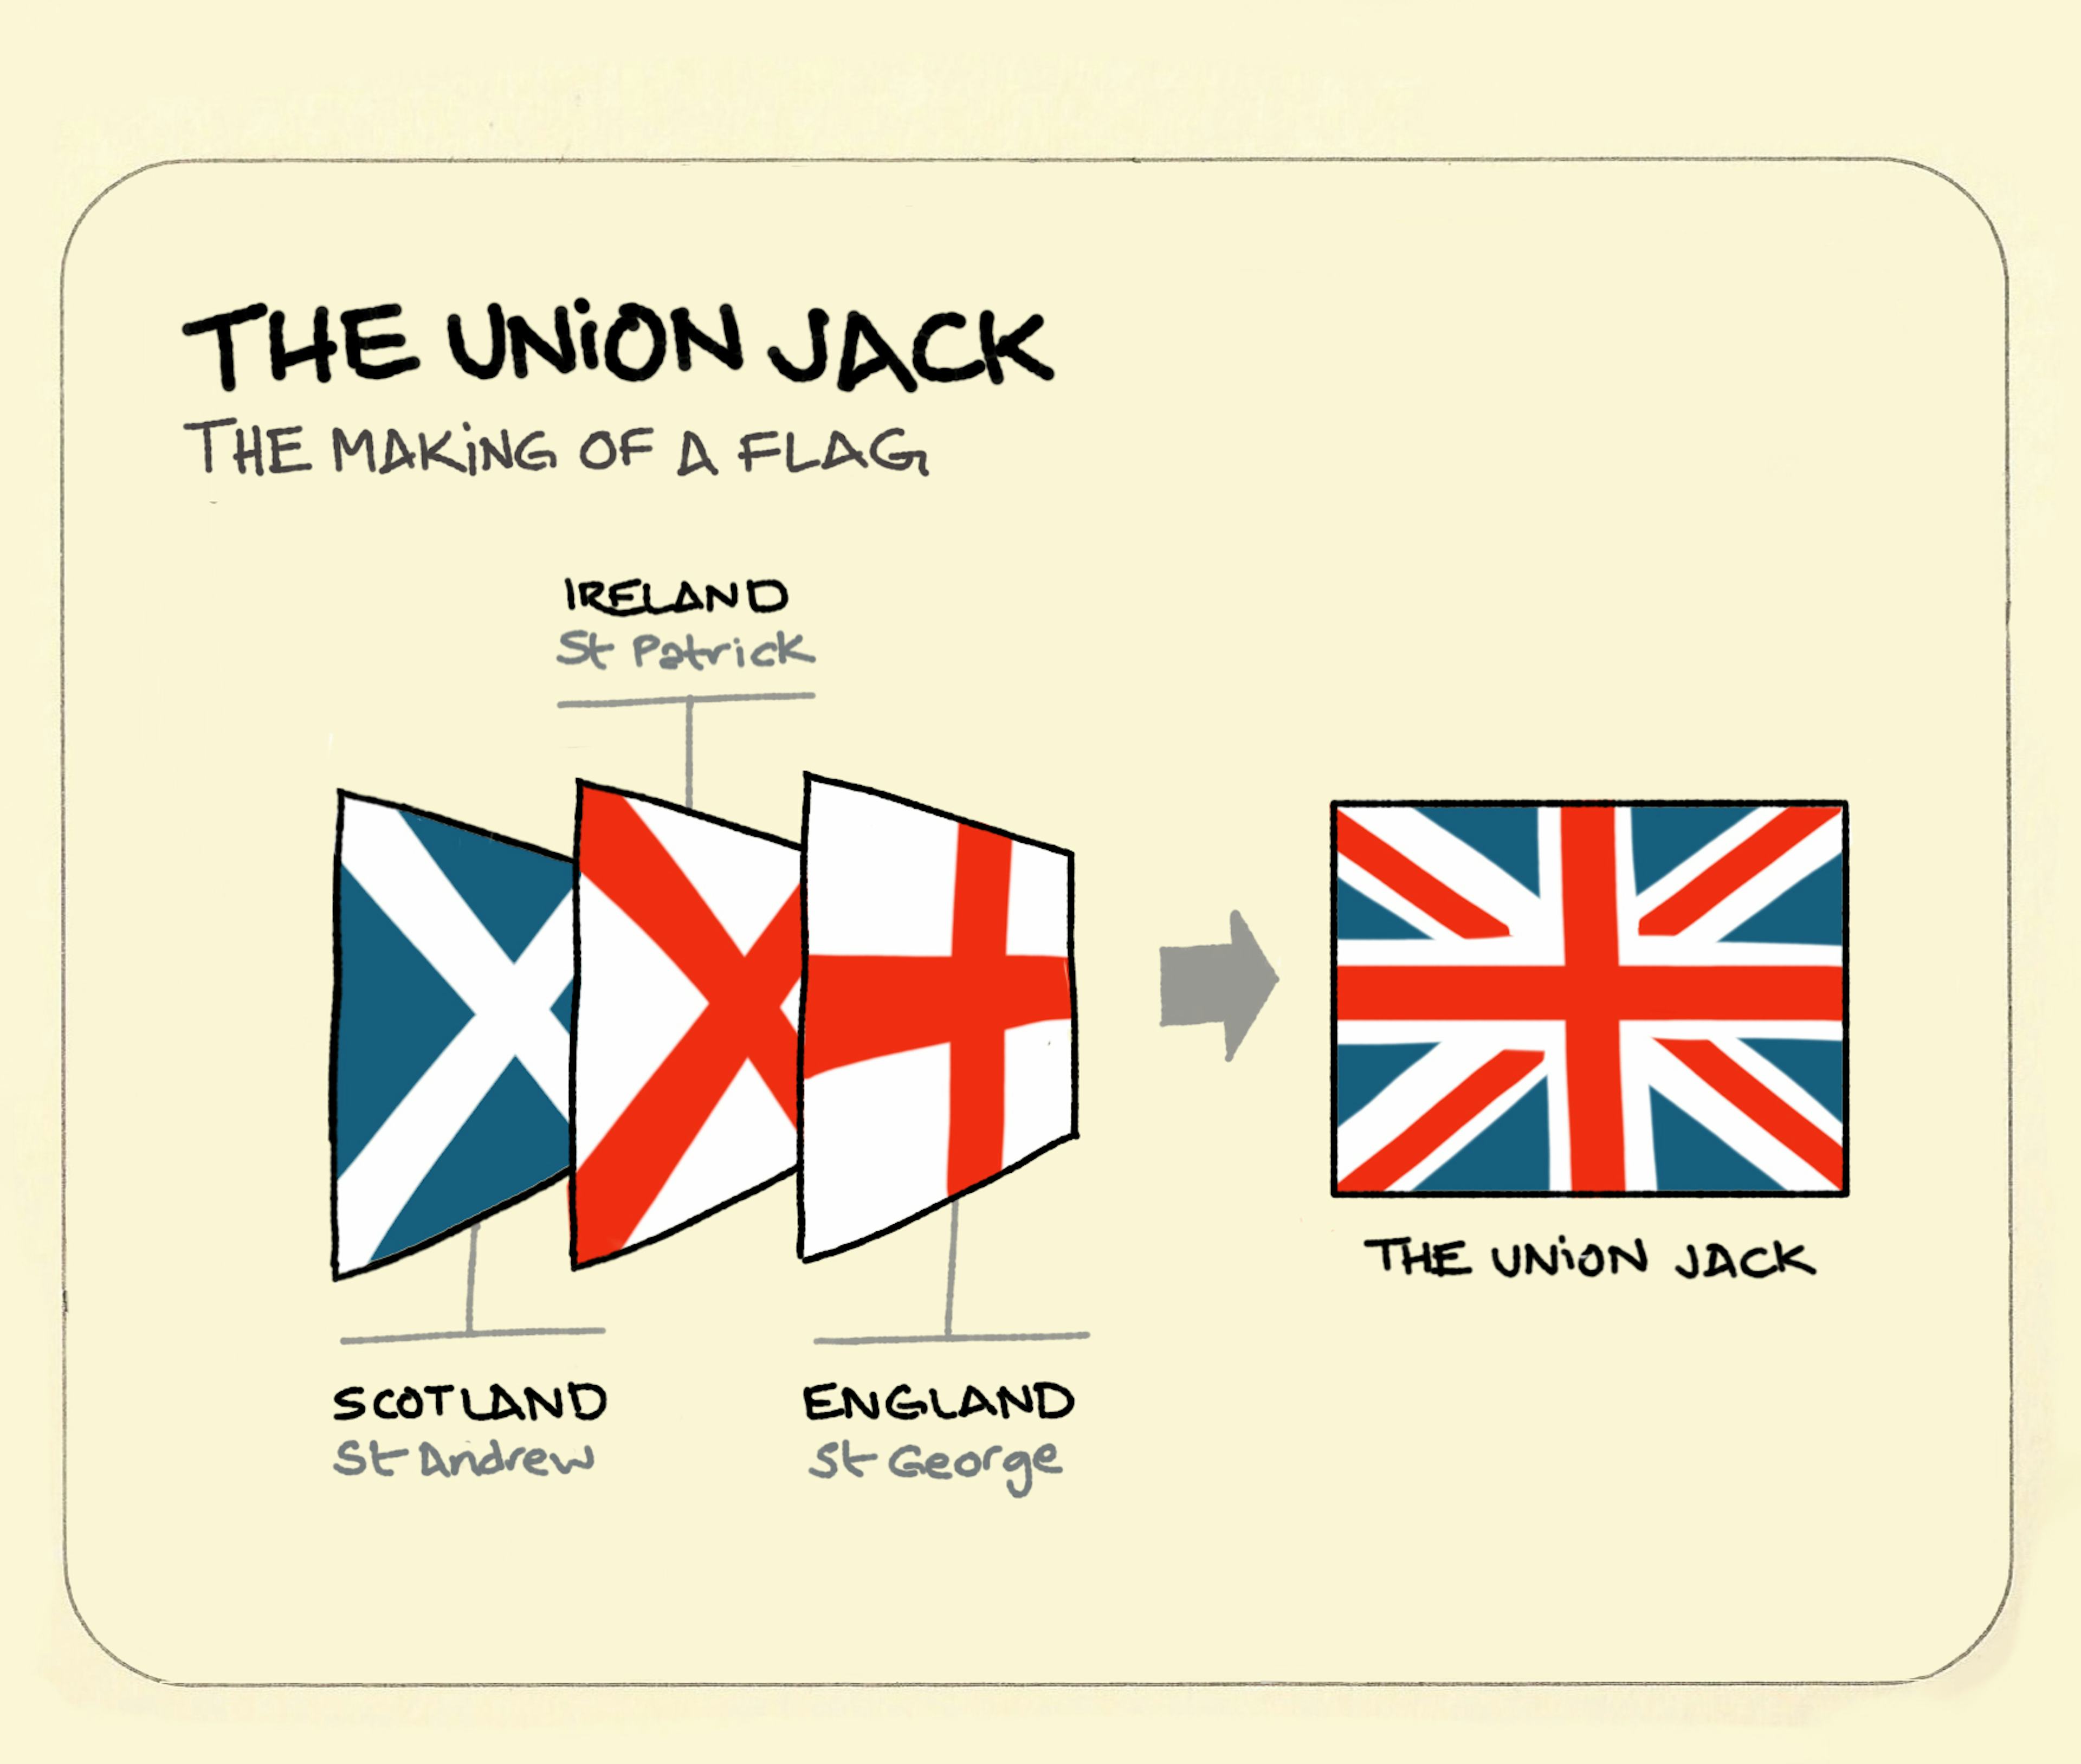 The Union Jack illustration of how it was constructed from the flags of Scotland, Ireland and England